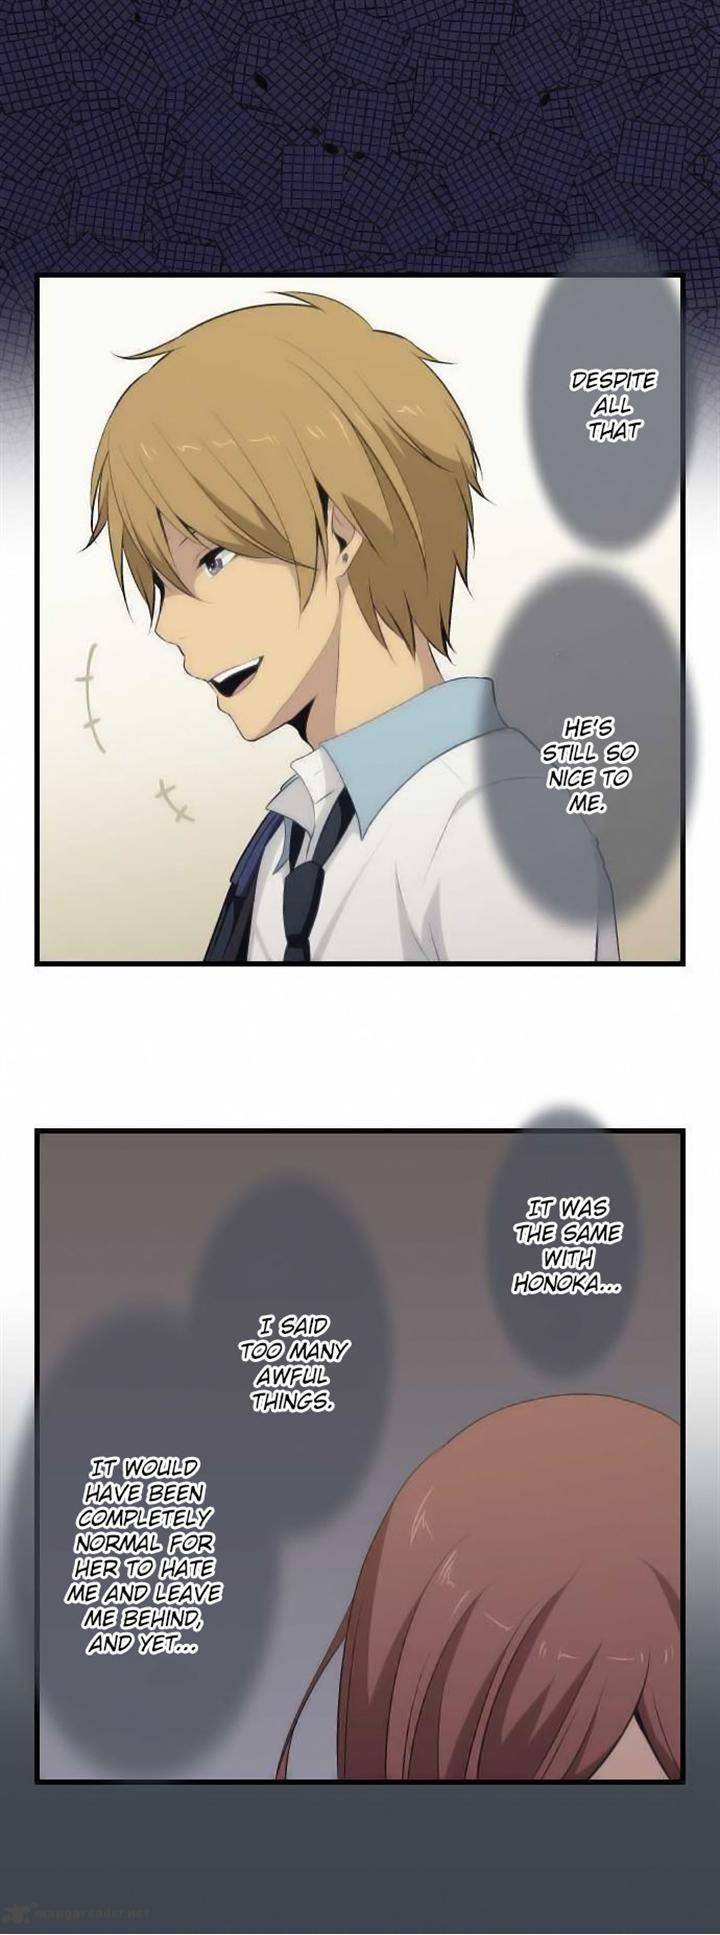 Relife 68 19